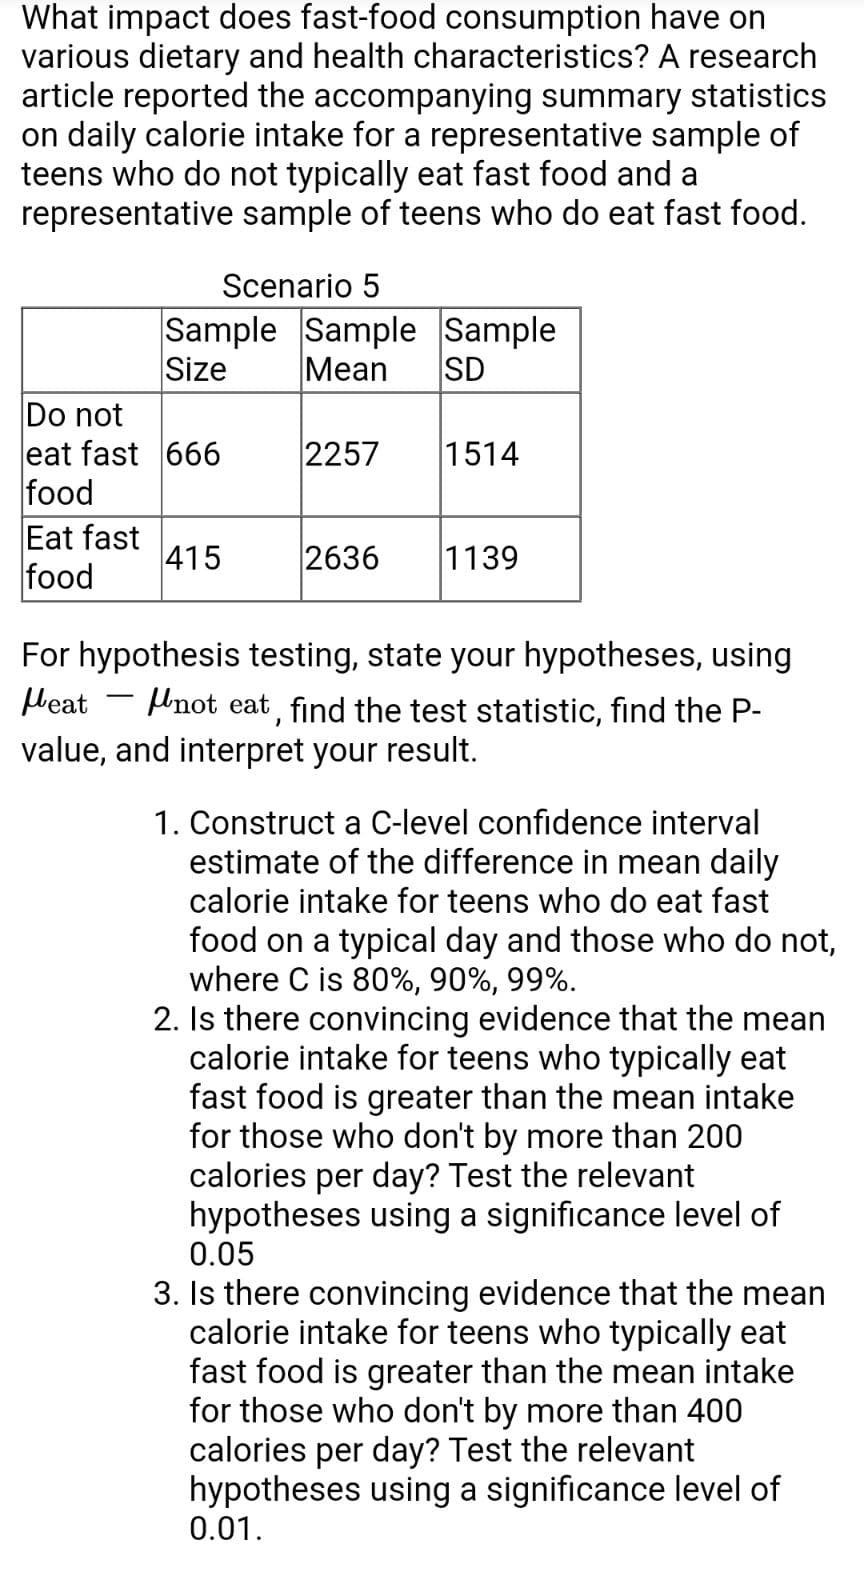 What impact does fast-food consumption have on
various dietary and health characteristics? A research
article reported the accompanying summary statistics
on daily calorie intake for a representative sample of
teens who do not typically eat fast food and a
representative sample of teens who do eat fast food.
Scenario 5
Sample Sample Sample
Size
Mean
SD
Do not
eat fast 666
food
2257
1514
Eat fast
415
food
2636
1139
For hypothesis testing, state your hypotheses, using
Heat
Unot eat, find the test statistic, find the P-
value, and interpret your result.
1. Construct a C-level confidence interval
estimate of the difference in mean daily
calorie intake for teens who do eat fast
food on a typical day and those who do not,
where C is 80%, 90%, 99%.
2. Is there convincing evidence that the mean
calorie intake for teens who typically eat
fast food is greater than the mean intake
for those who don't by more than 200
calories per day? Test the relevant
hypotheses using a significance level of
0.05
3. Is there convincing evidence that the mean
calorie intake for teens who typically eat
fast food is greater than the mean intake
for those who don't by more than 400
calories per day? Test the relevant
hypotheses using a significance level of
0.01.
